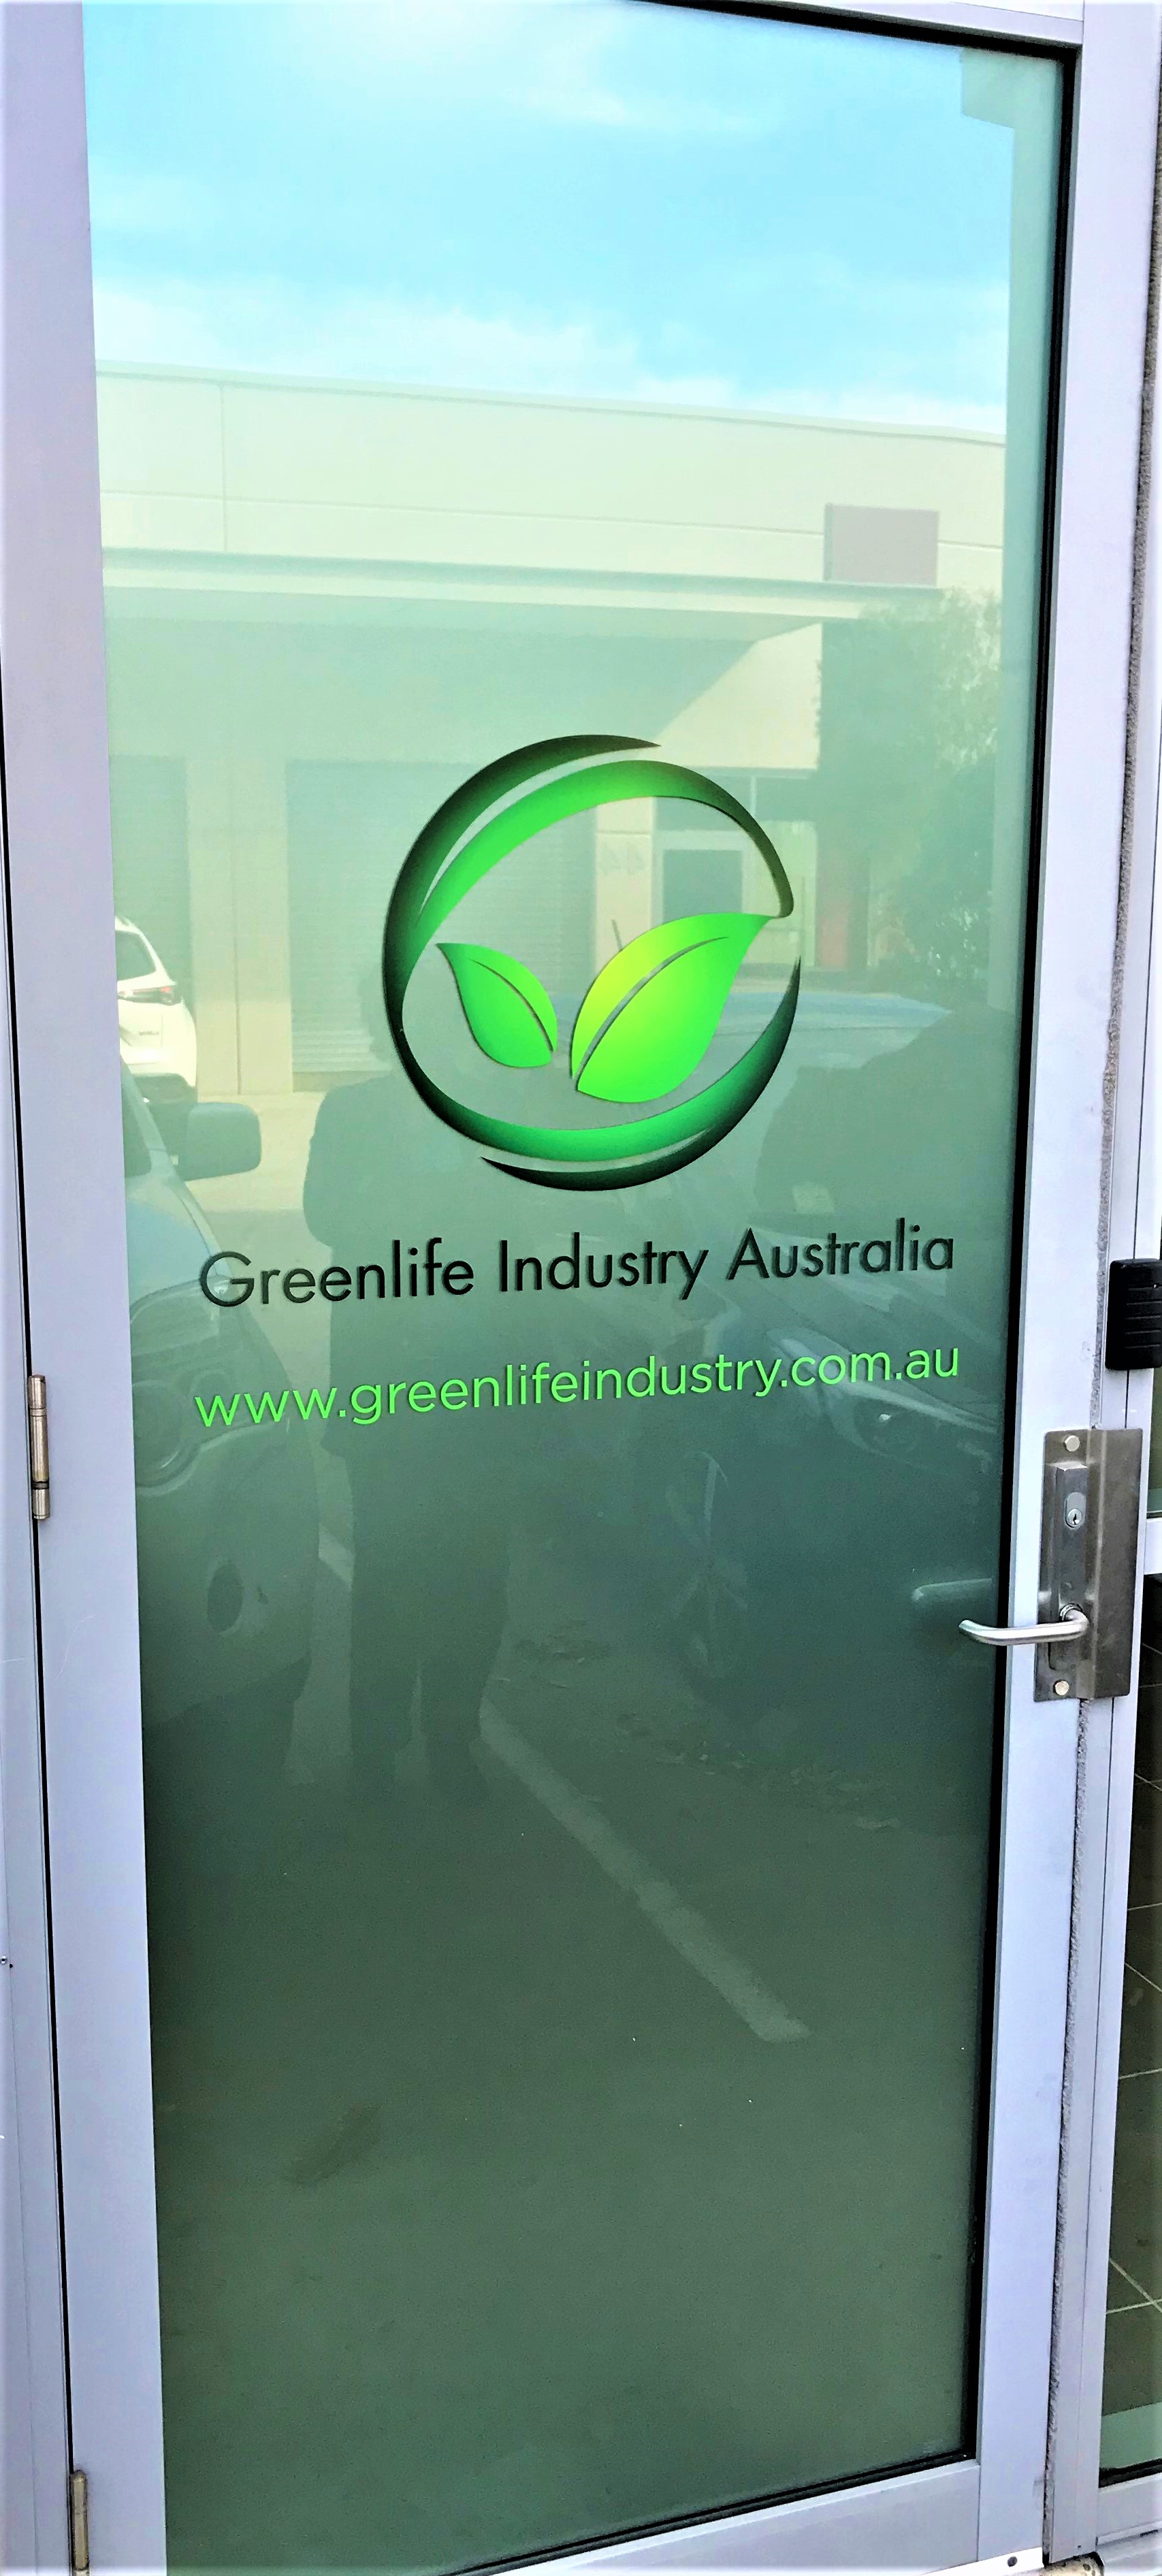 Greenlife Entry General Signage NSW